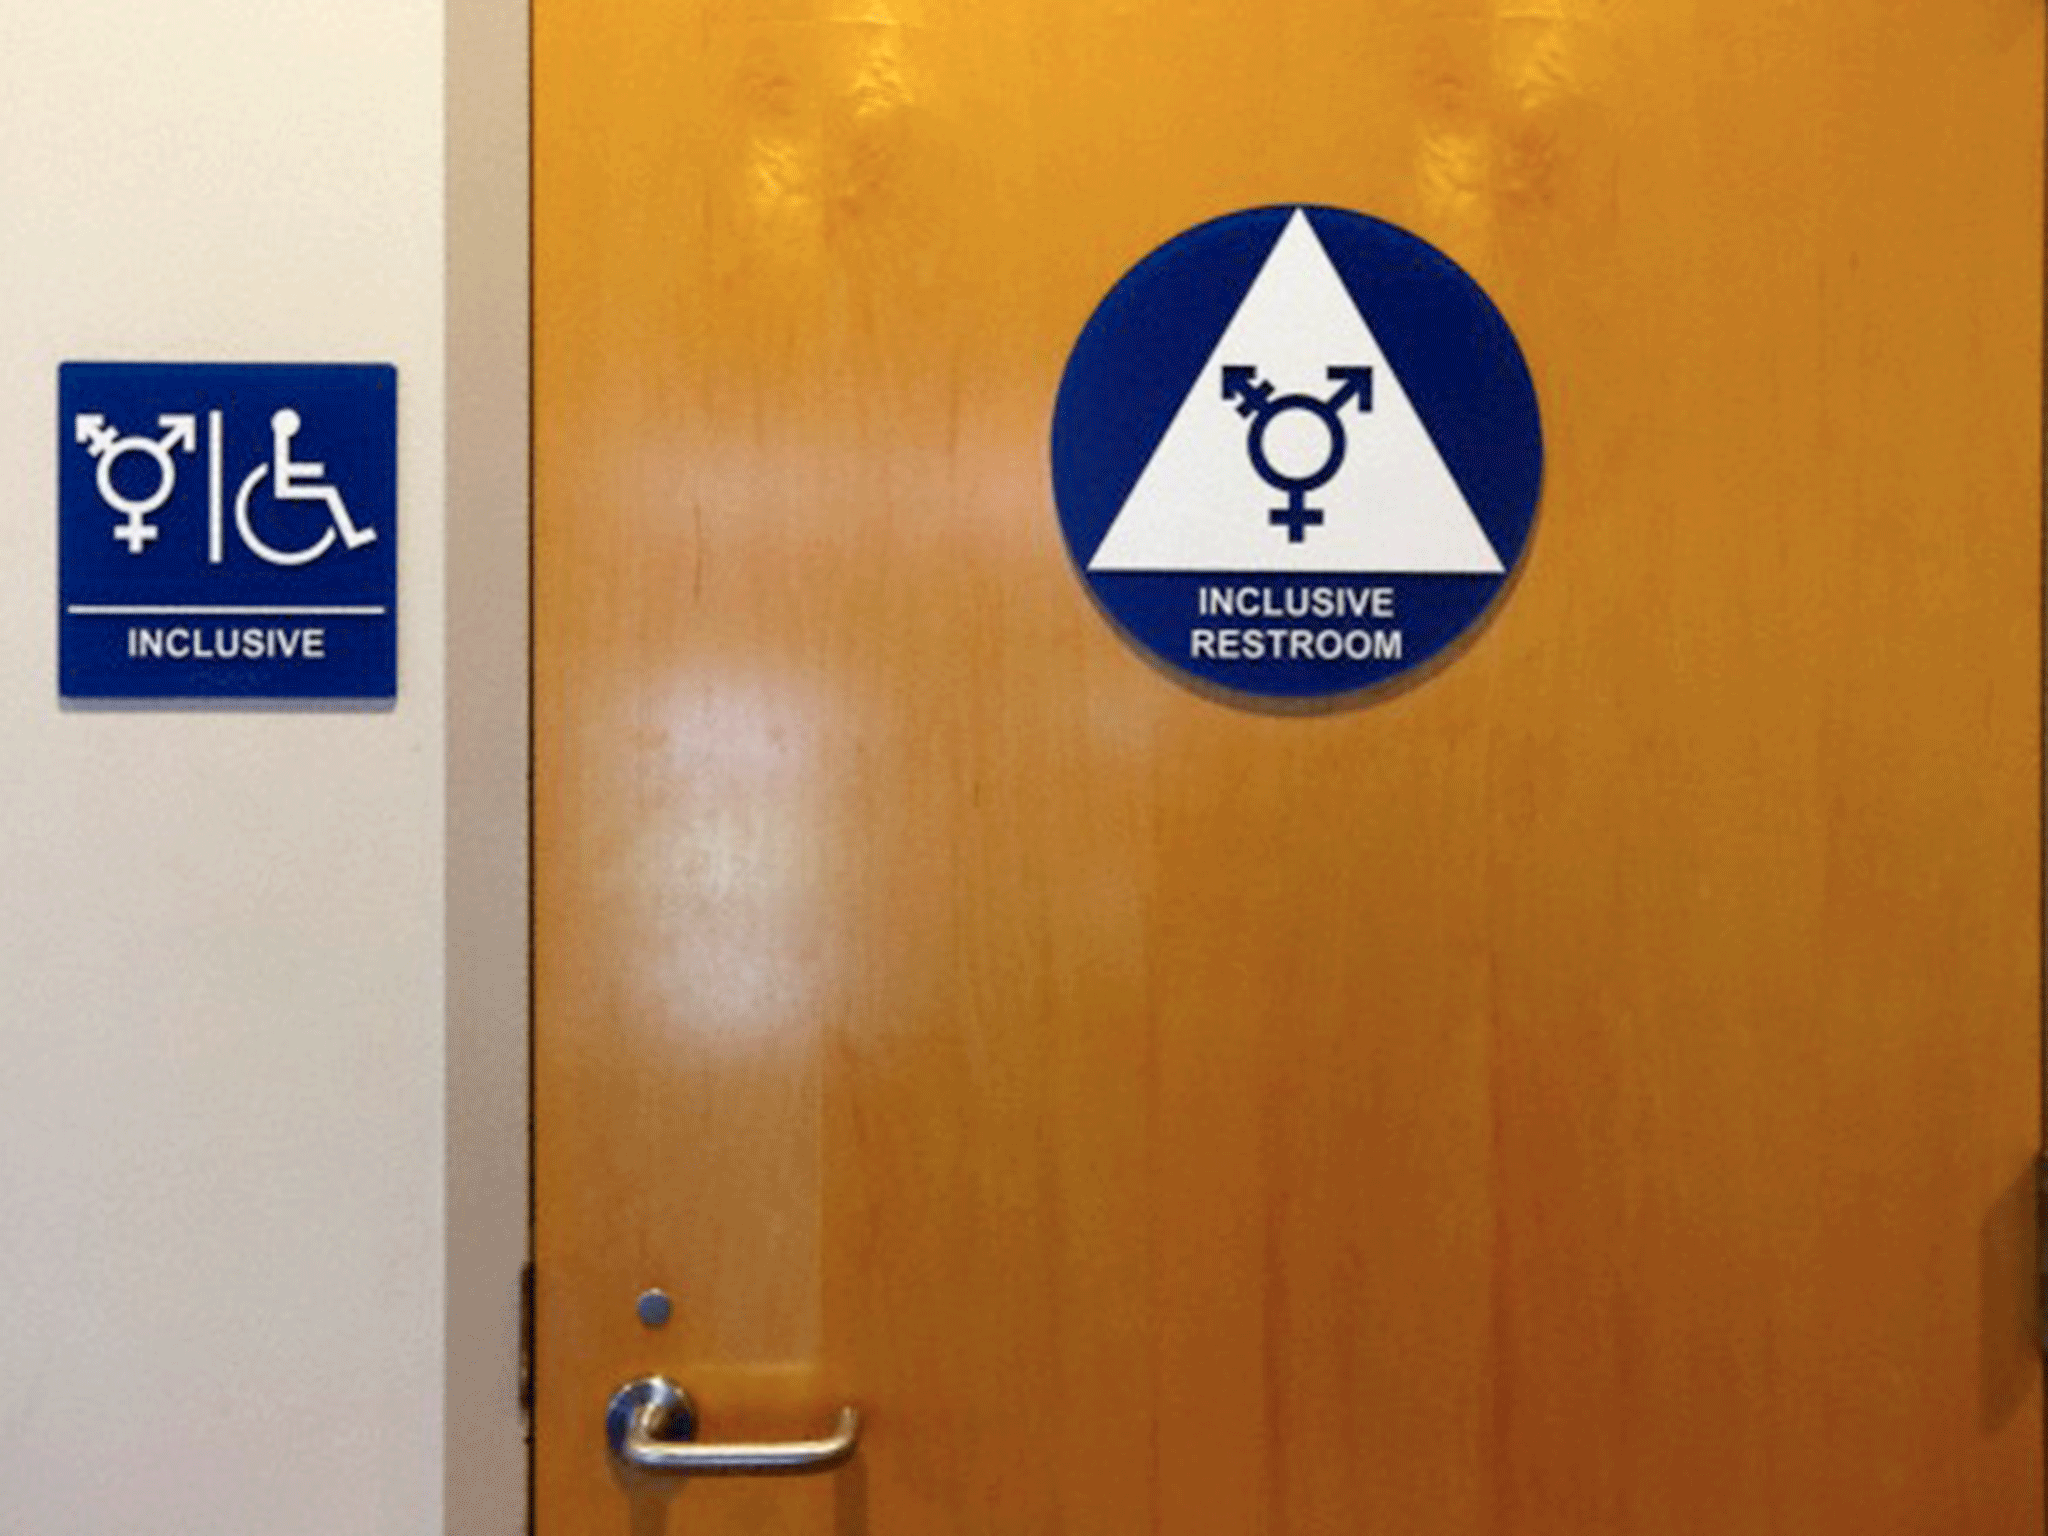 Gender neutral toilets are already commonplace in Scandinavian countries and are becoming increasingly common in the UK